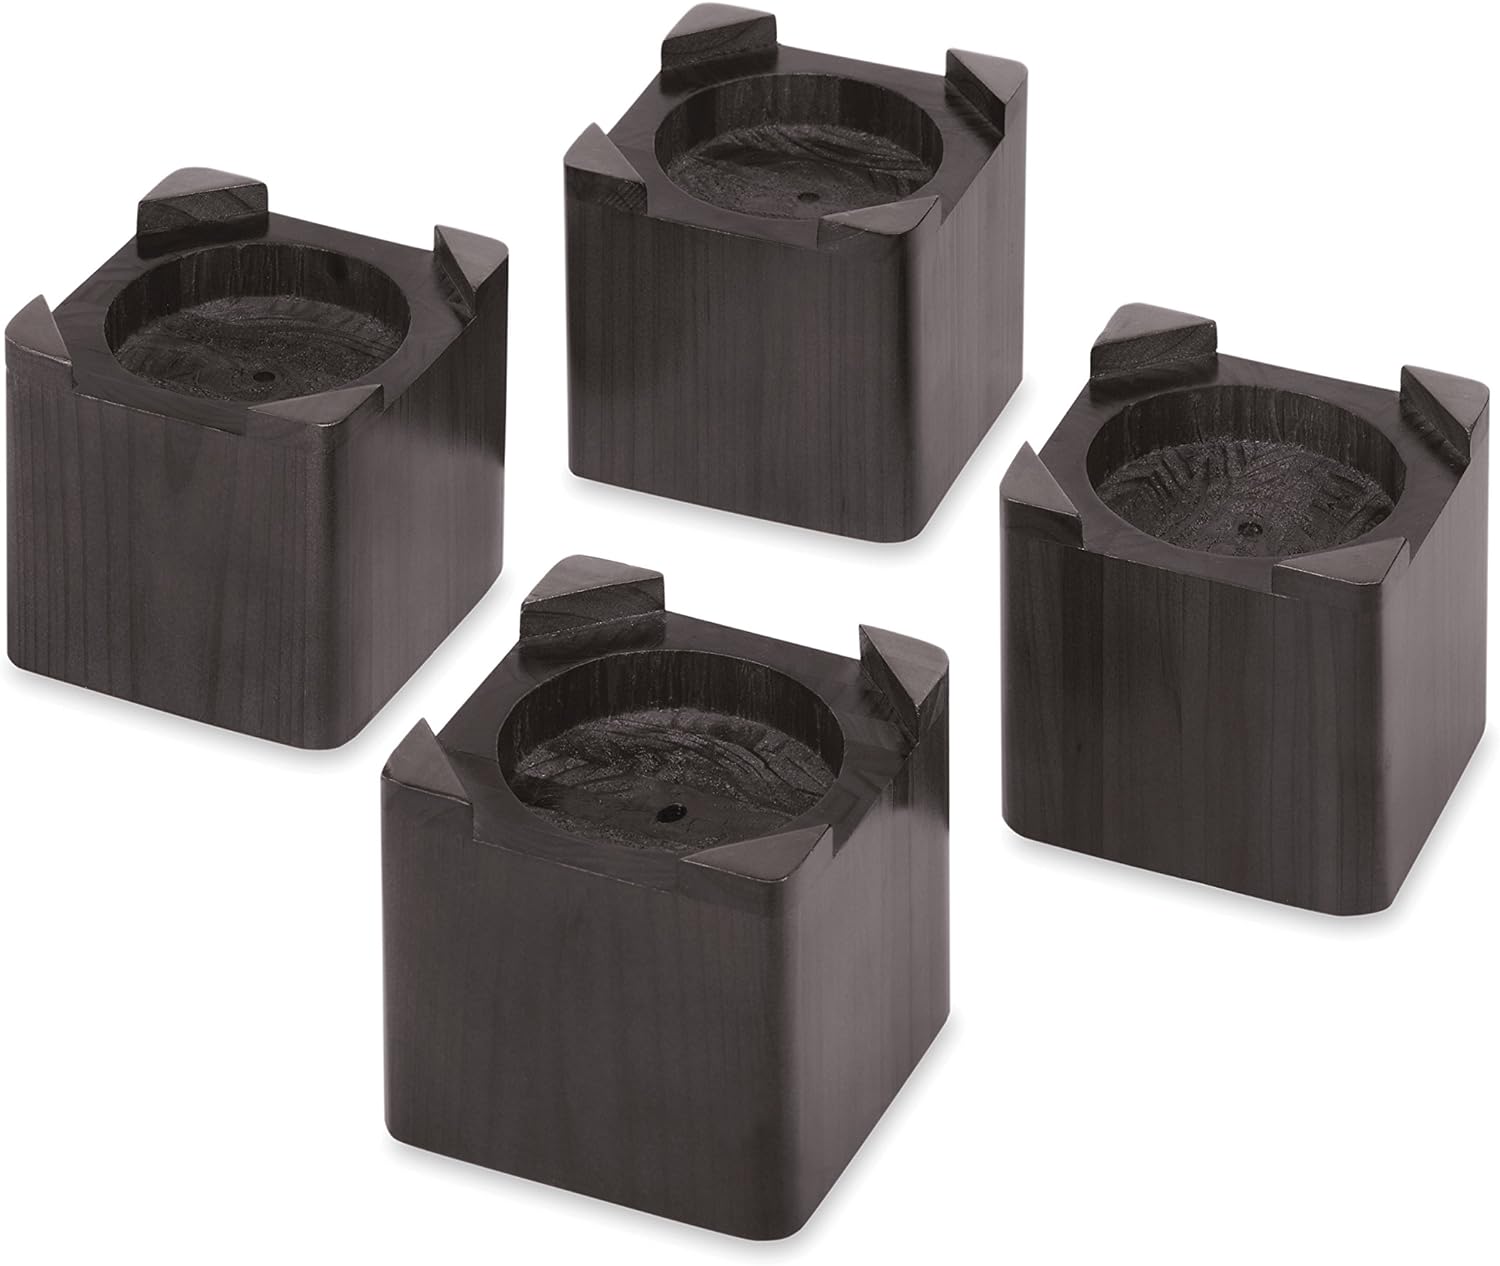 Set of 4 Wooden Bed Risers, Gain Underbed Space - Sturdy and Stackable